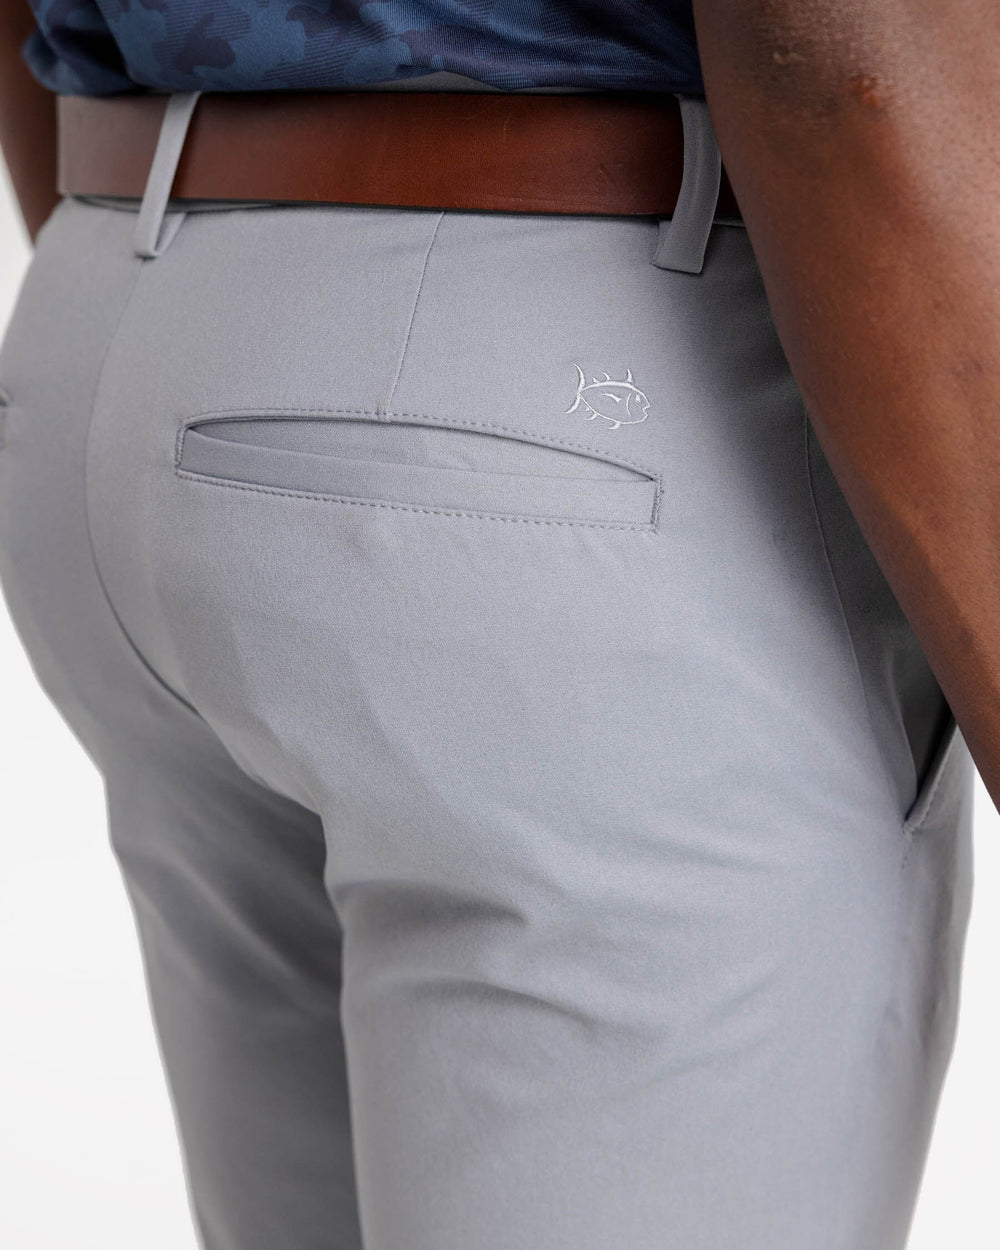 The detail view of the Southern Tide Jack Performance Pant by Southern Tide - Steel Grey